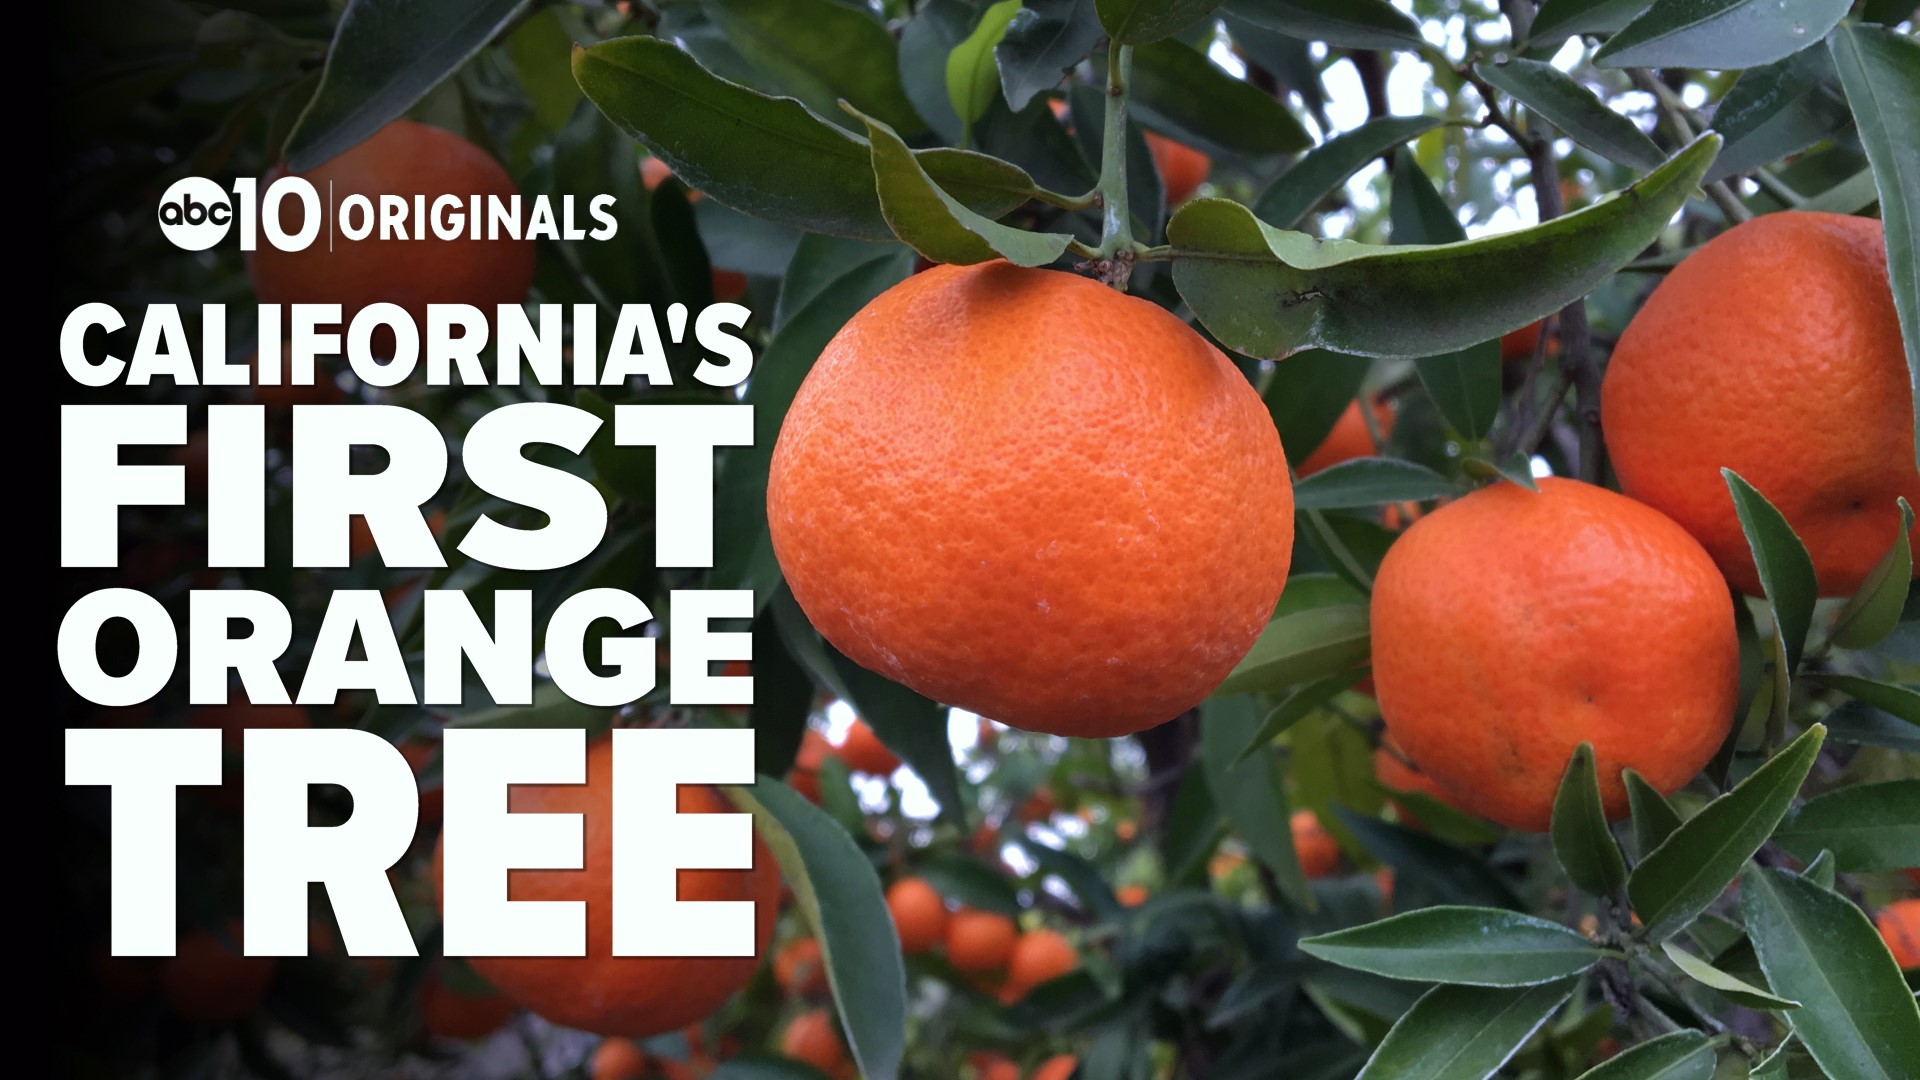 Do you know that more citrus fruit comes from California than it does from Florida? John Bartell visits the "mother" orange tree that started it all, and stops by Mandarin Hill in Penryn to see what the harvest looks like, 163 years after that first citrus tree was planted.